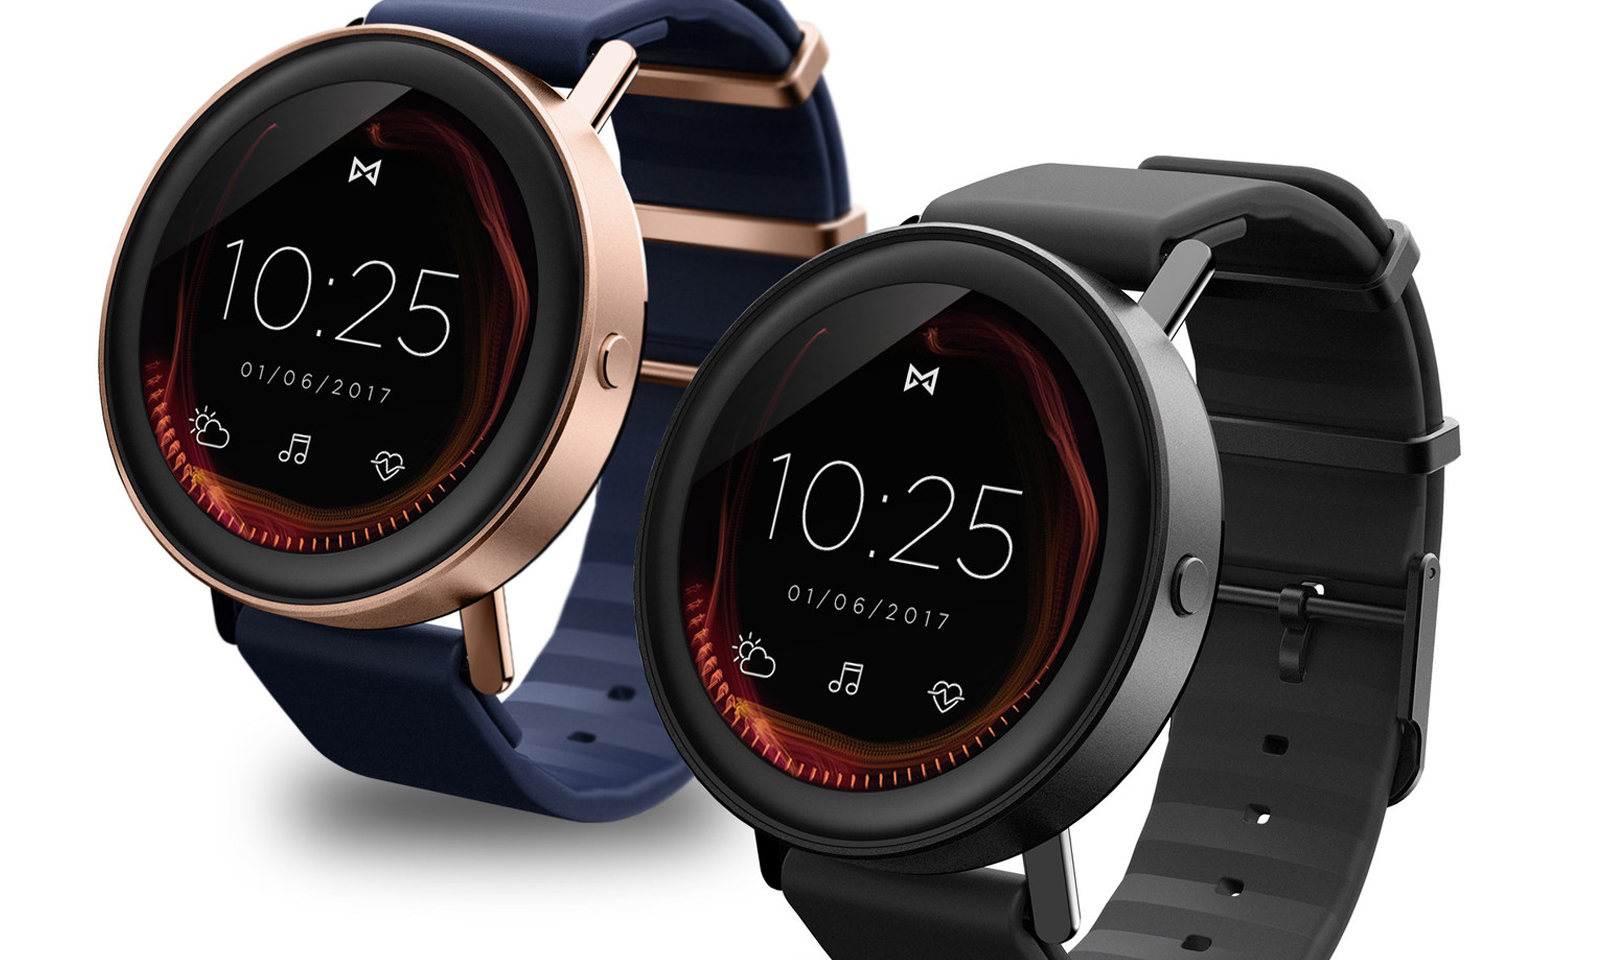 Lifestyle Timepiece Fossil Group and Google fashion first smartwatches.